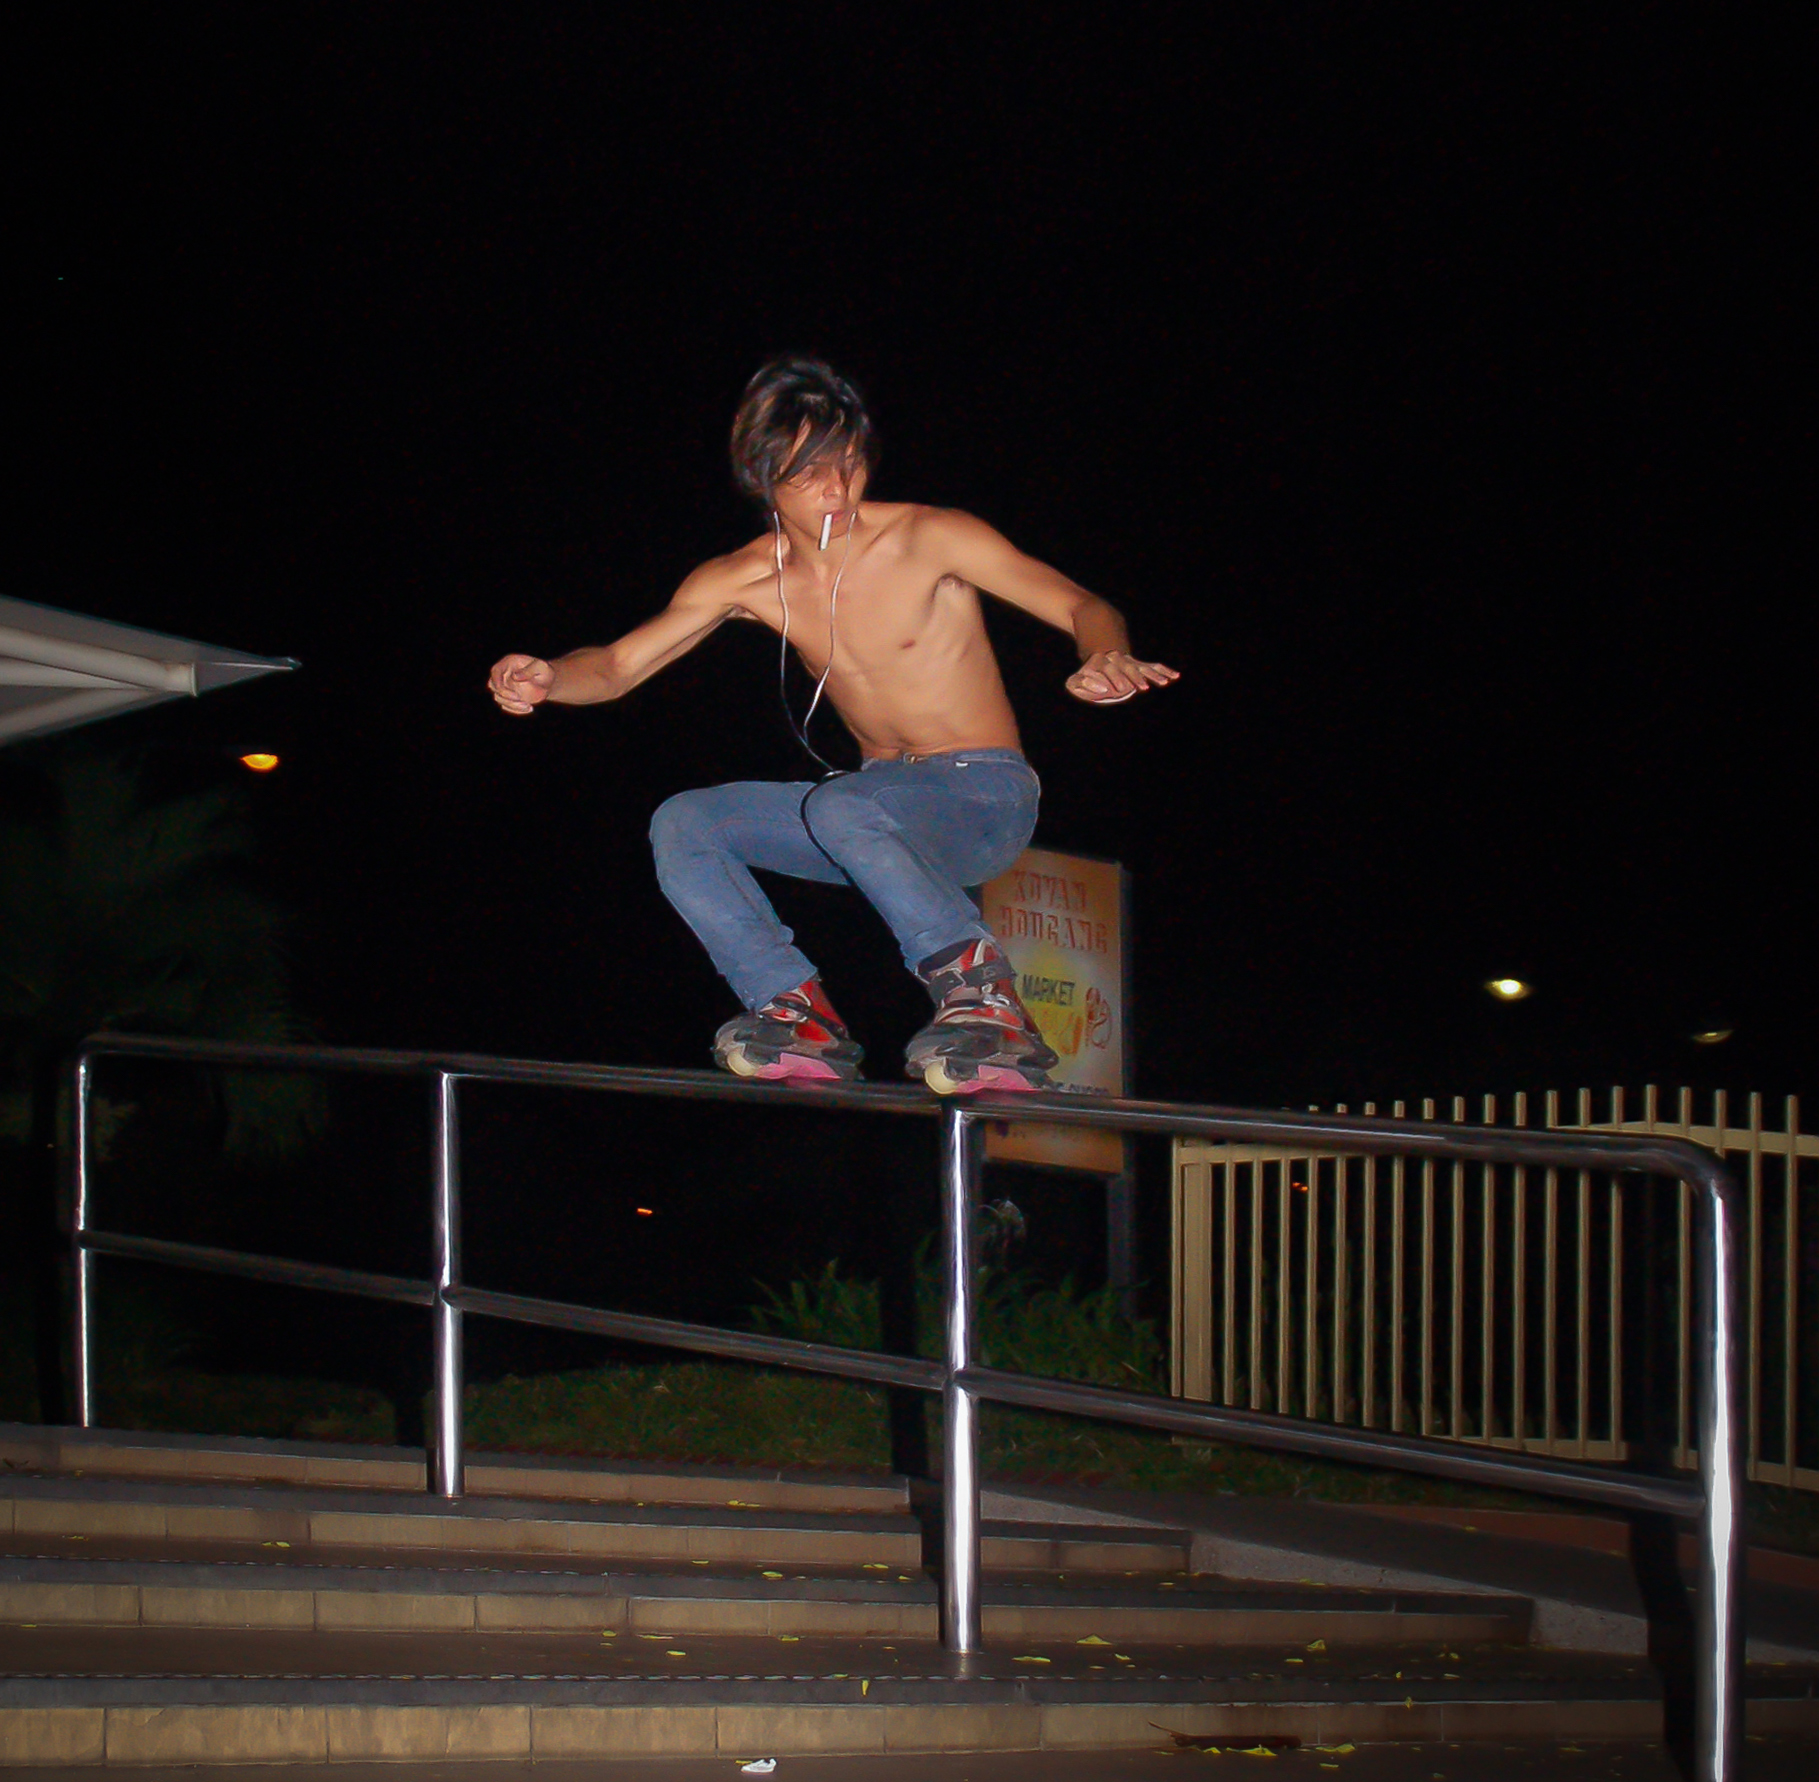 A skater grinds down a handrail while smoking at Hougang Central.